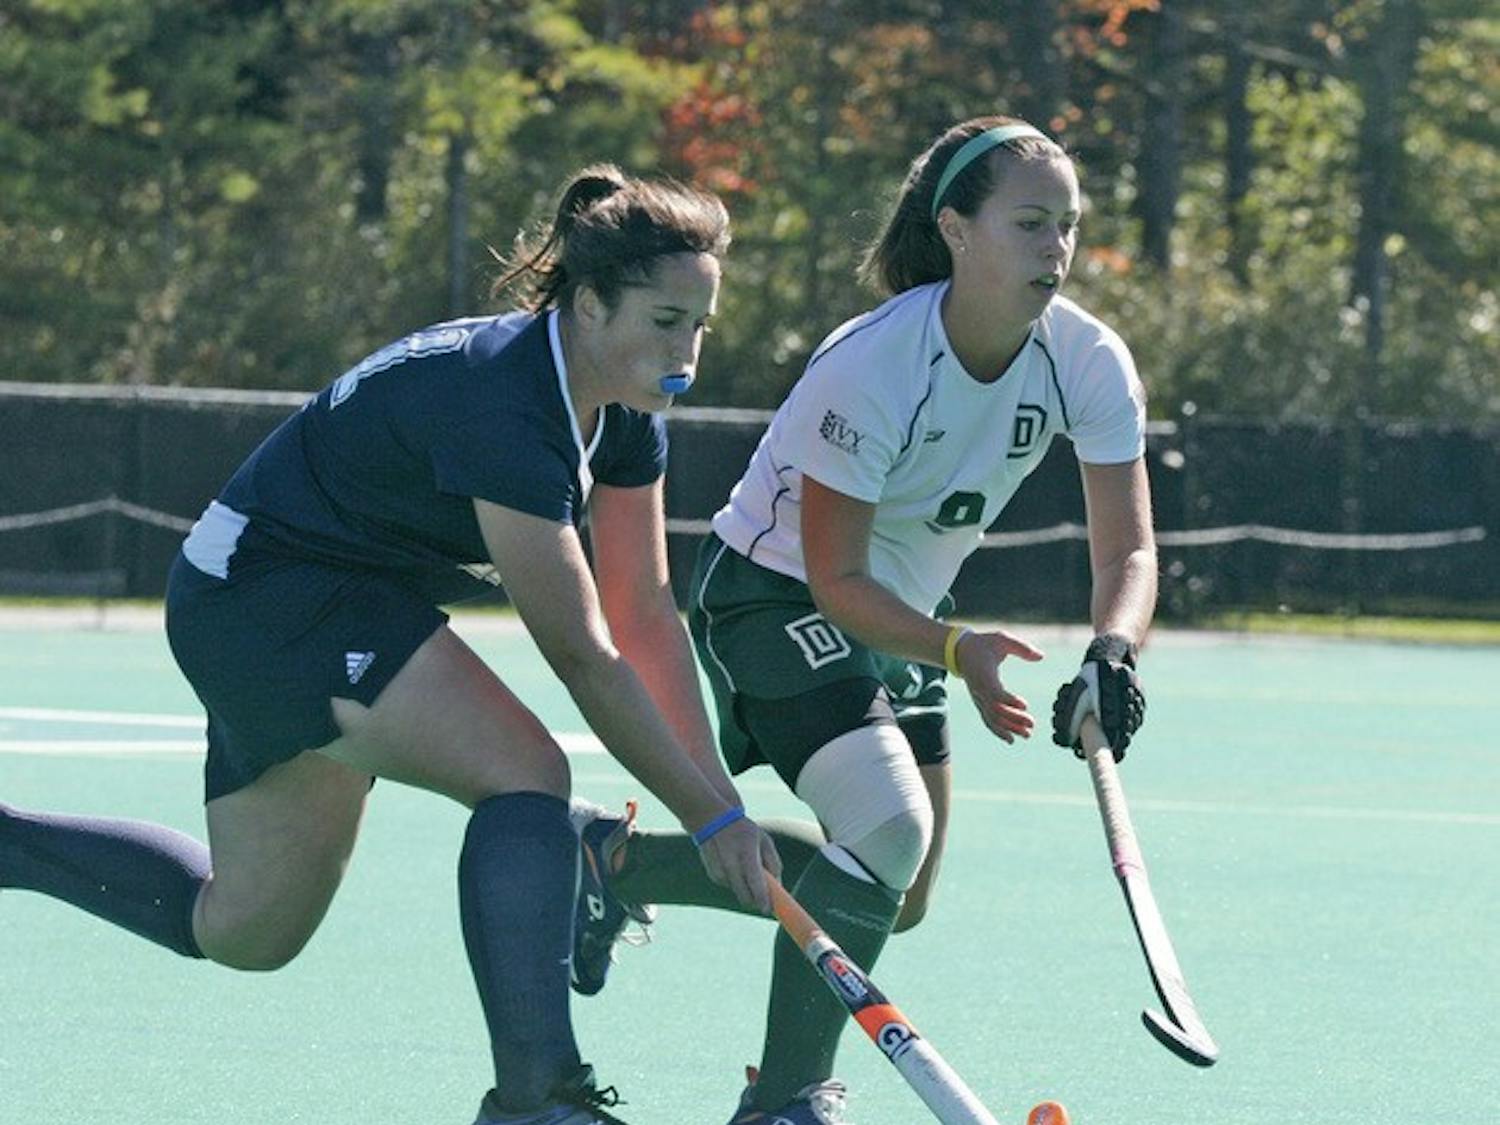 Dartmouth held Yale scoreless through 84 minutes of play on Saturday, only to lose in the second overtime.